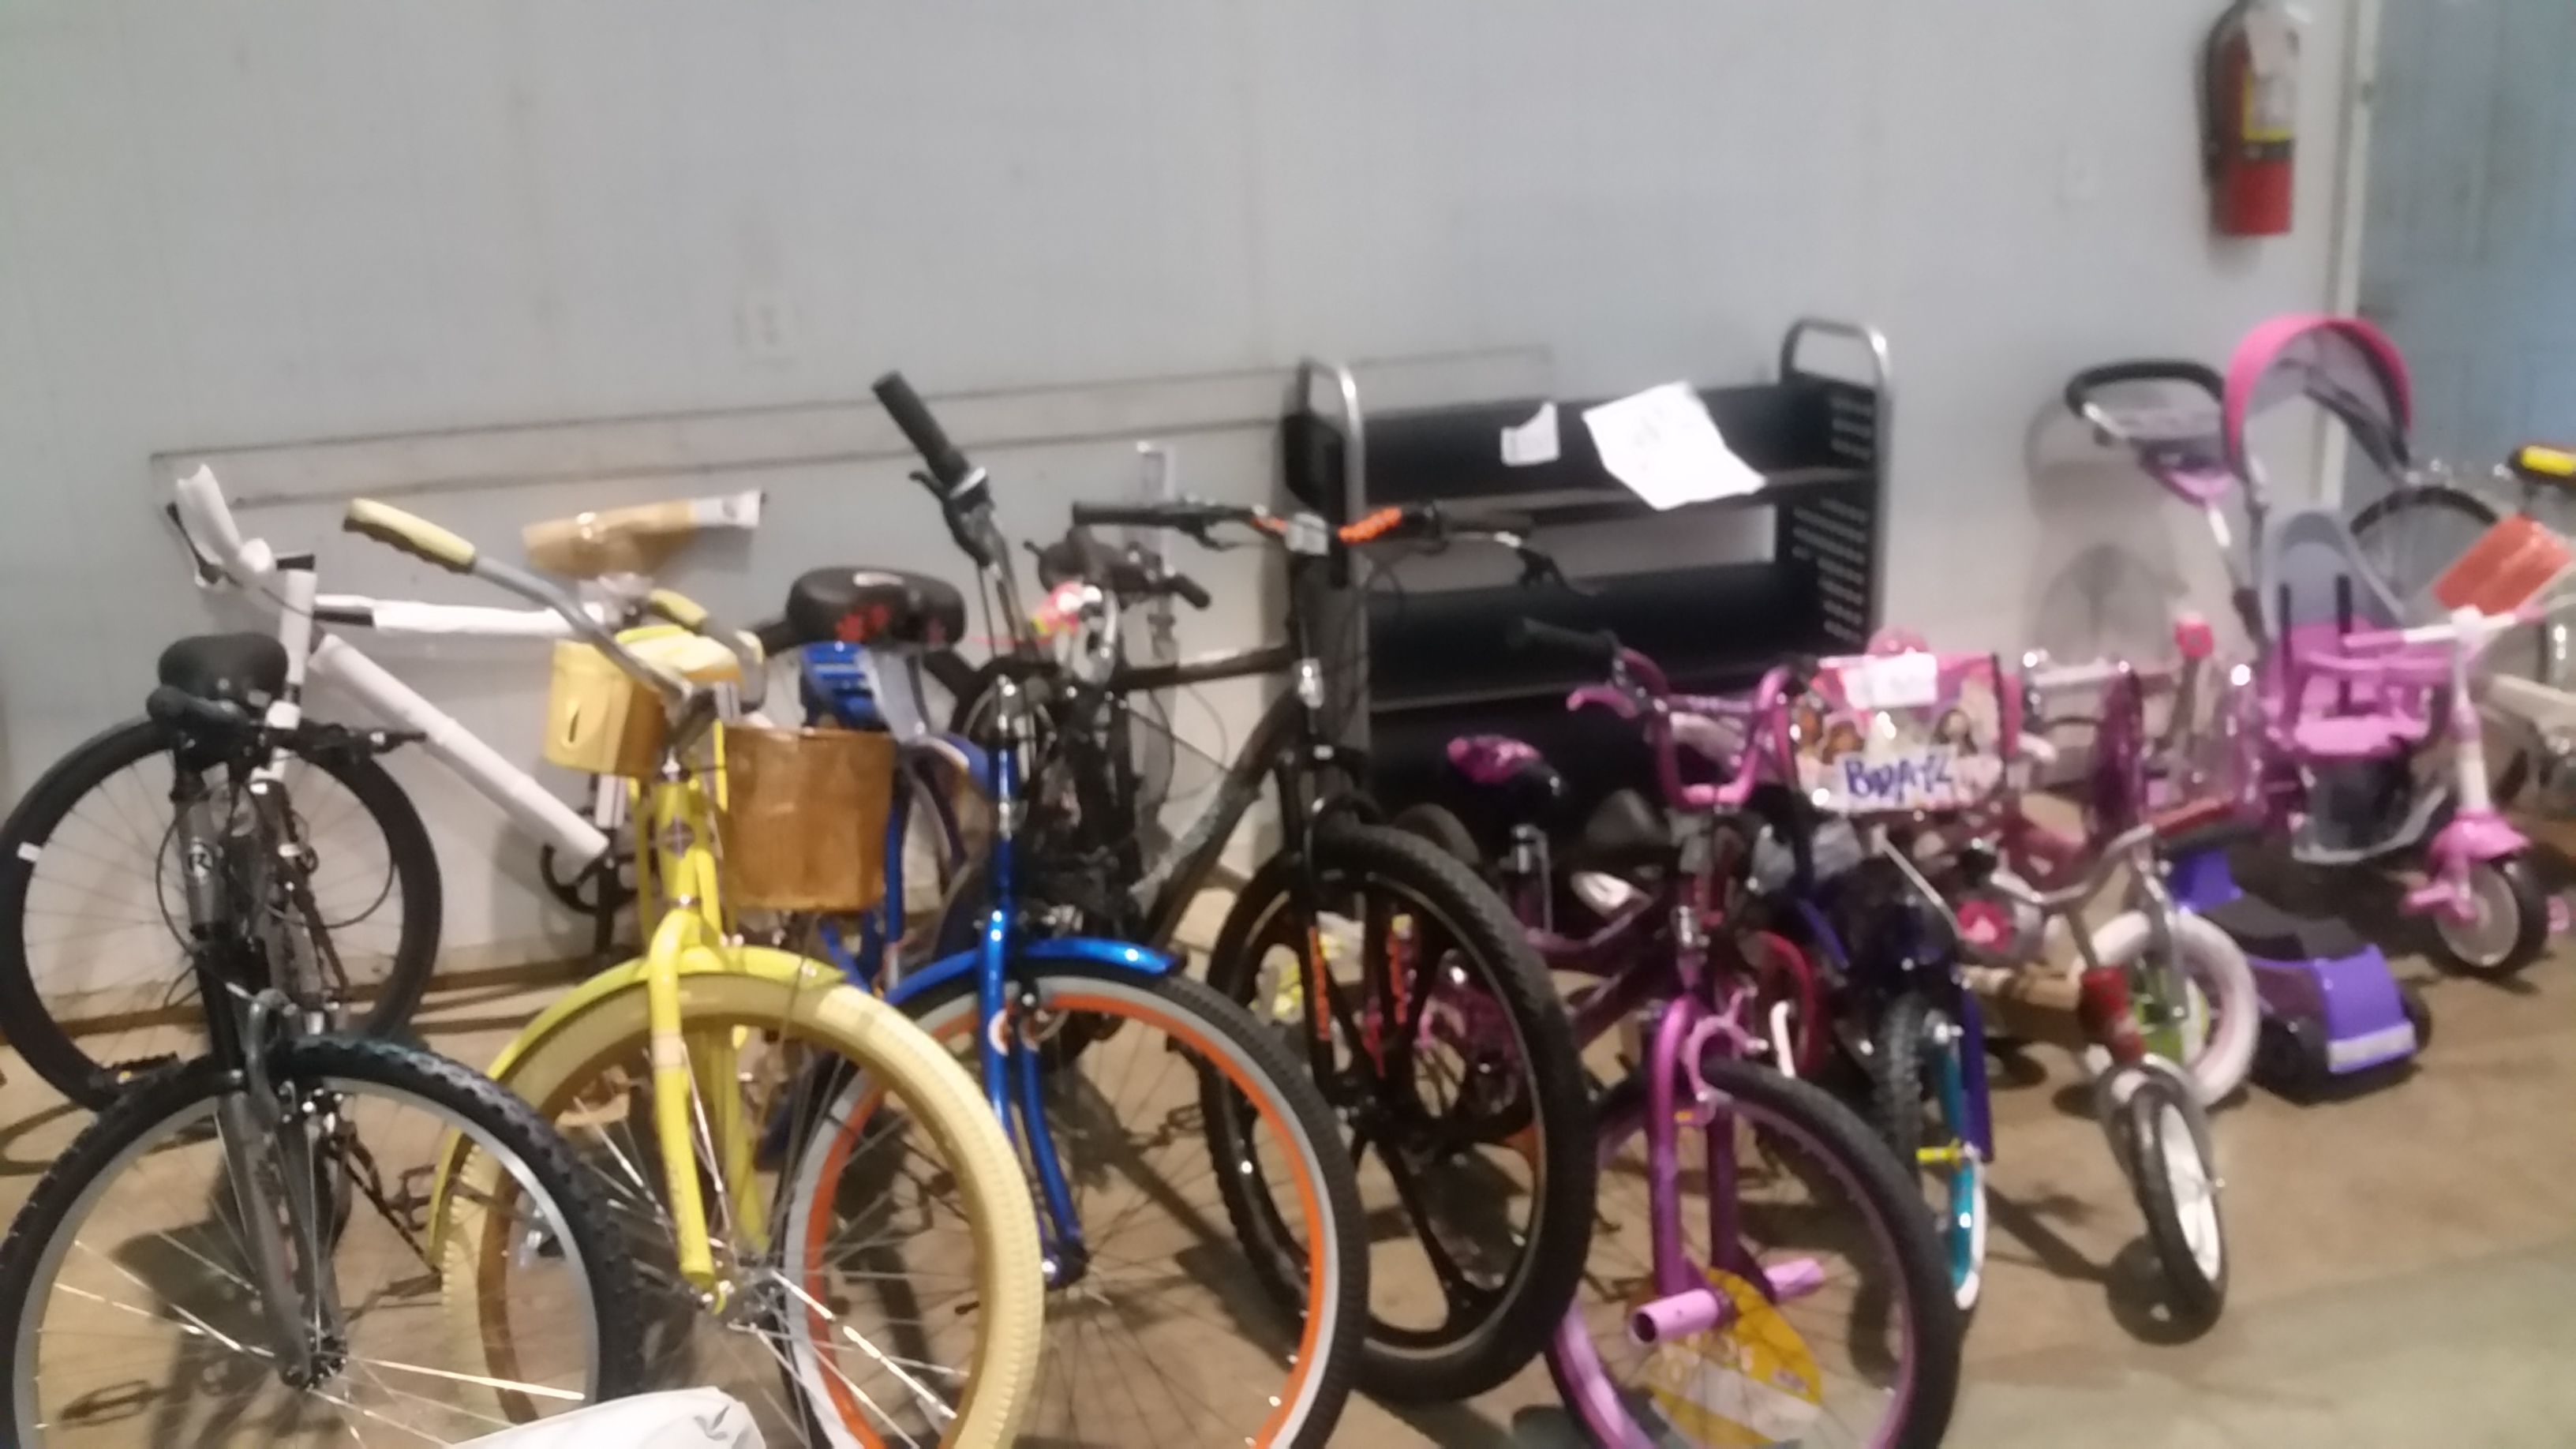 Bikes for children and up brand new assembled prices differ